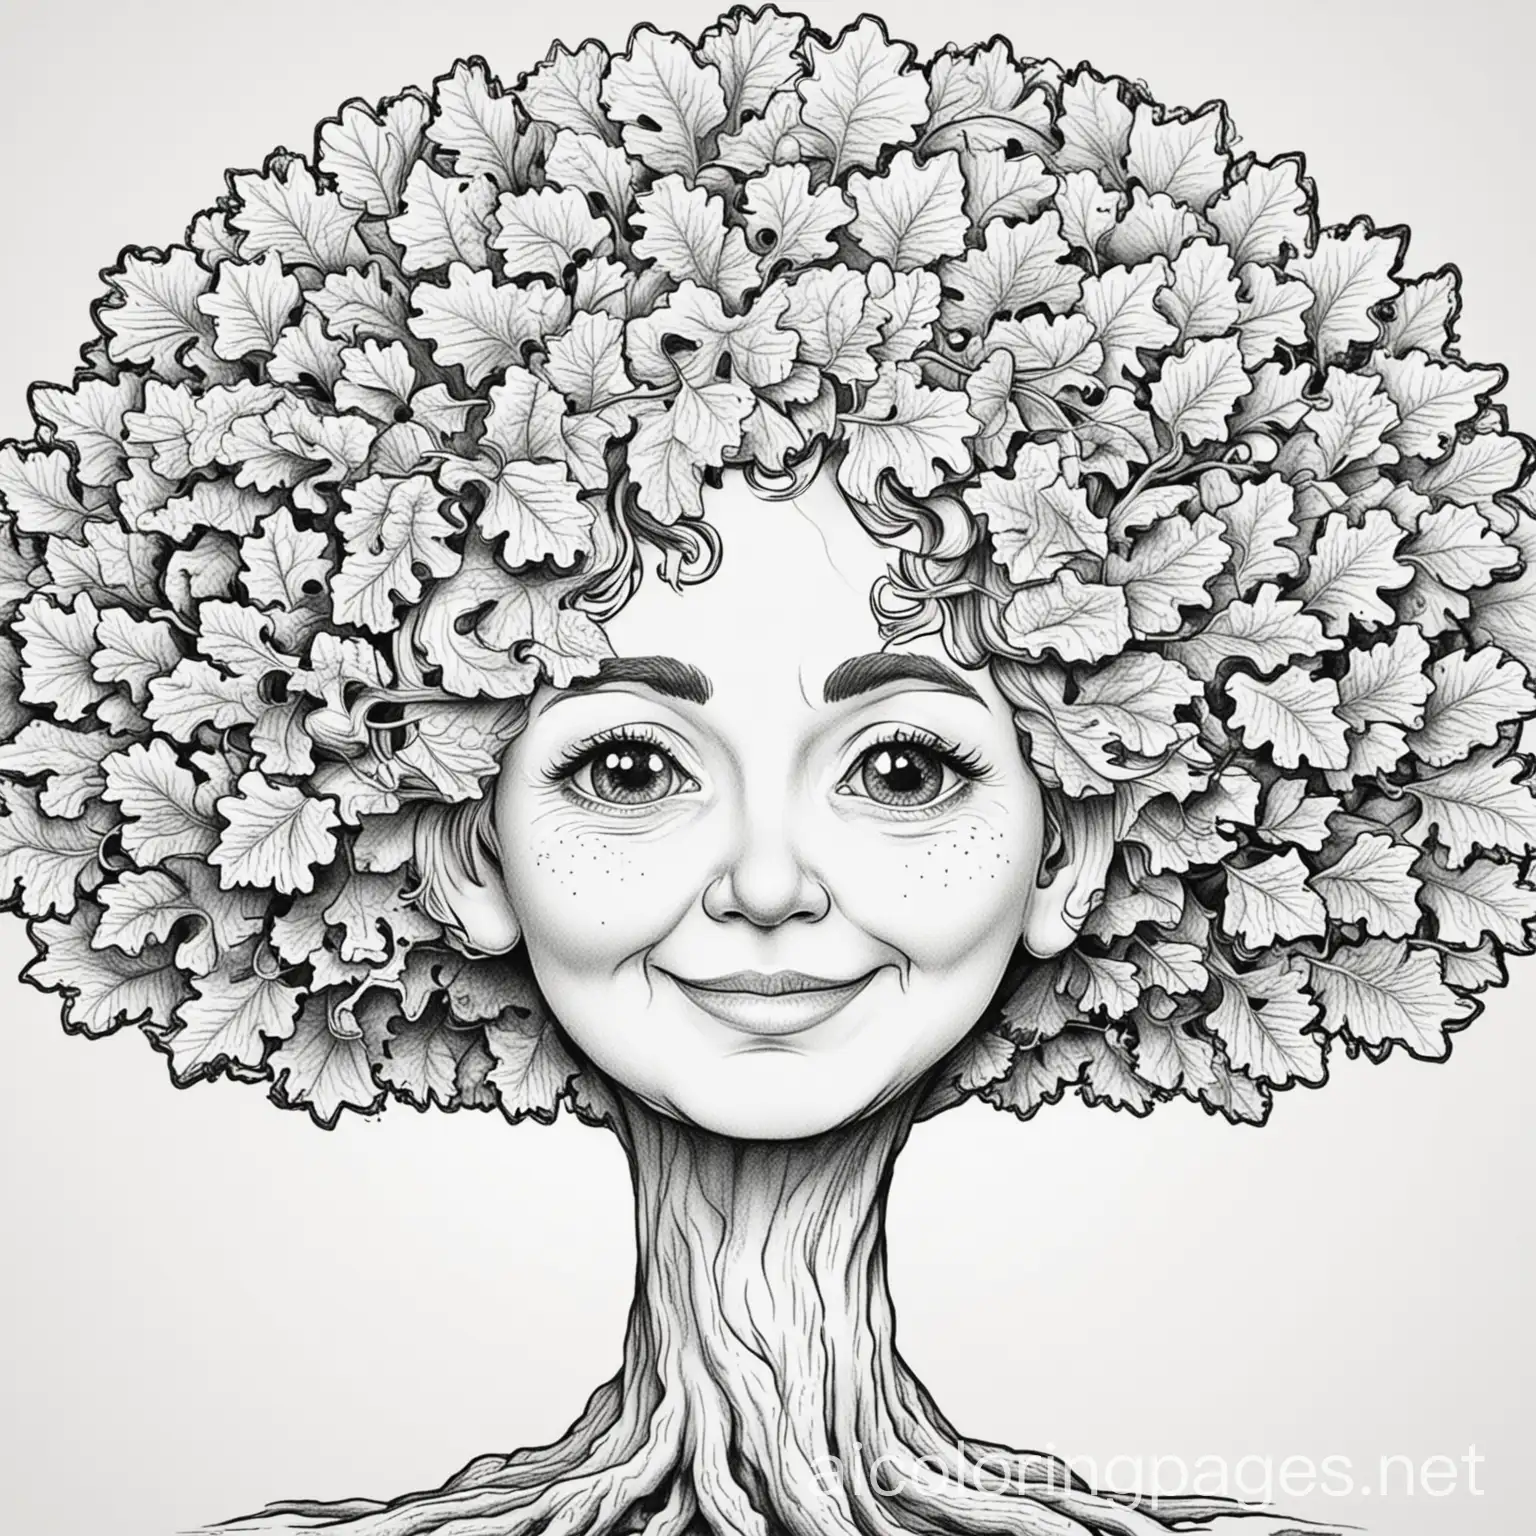 oak tree with a friendly grandmother face to color in for children, Coloring Page, black and white, line art, white background, Simplicity, Ample White Space. The background of the coloring page is plain white to make it easy for young children to color within the lines. The outlines of all the subjects are easy to distinguish, making it simple for kids to color without too much difficulty